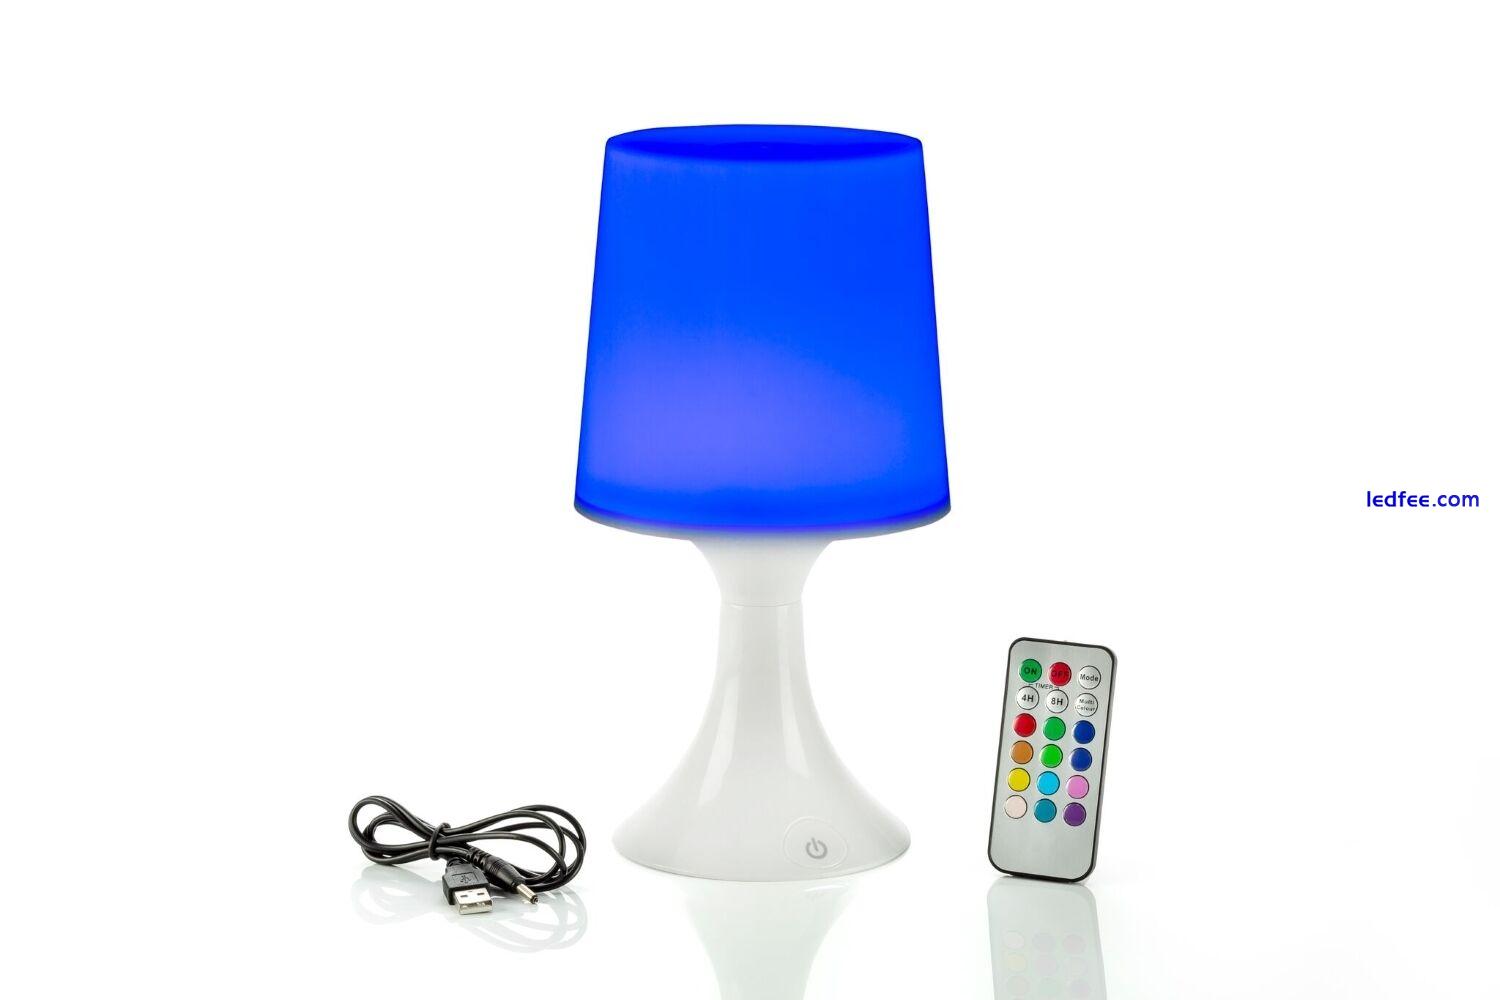 Auraglow Remote Control Colour Changing Wireless LED Mood Light Table Desk Lamp 3 